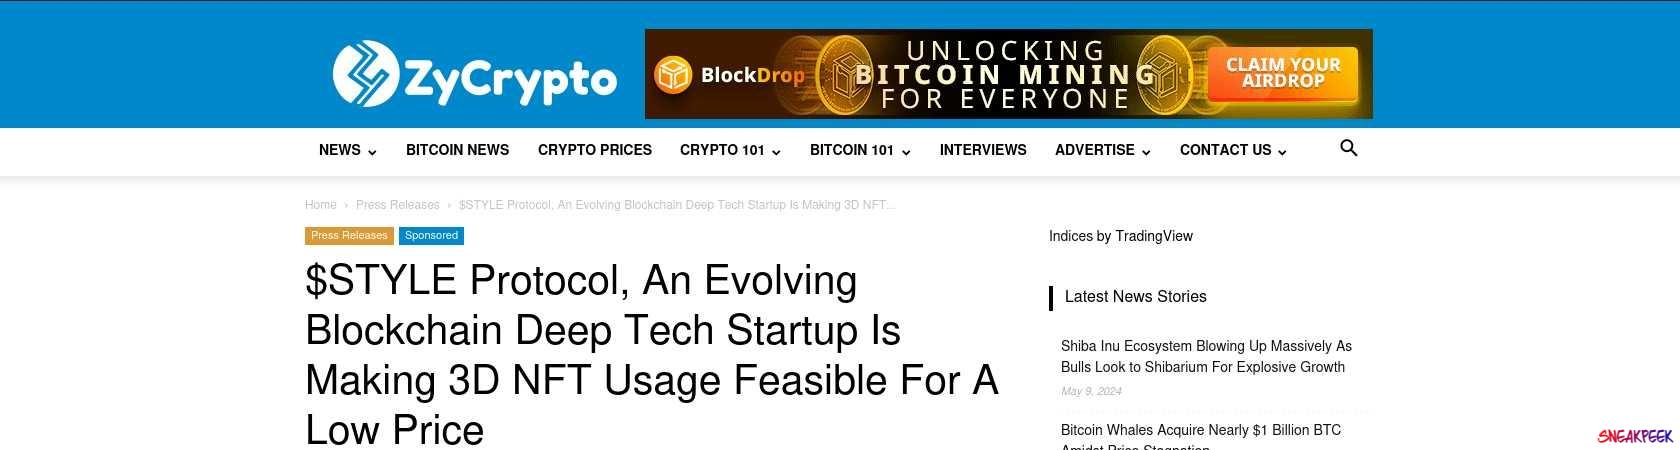 Read the full Article:  ⭲ $STYLE Protocol, An Evolving Blockchain Deep Tech Startup Is Making 3D NFT Usage Feasible For A Low Price